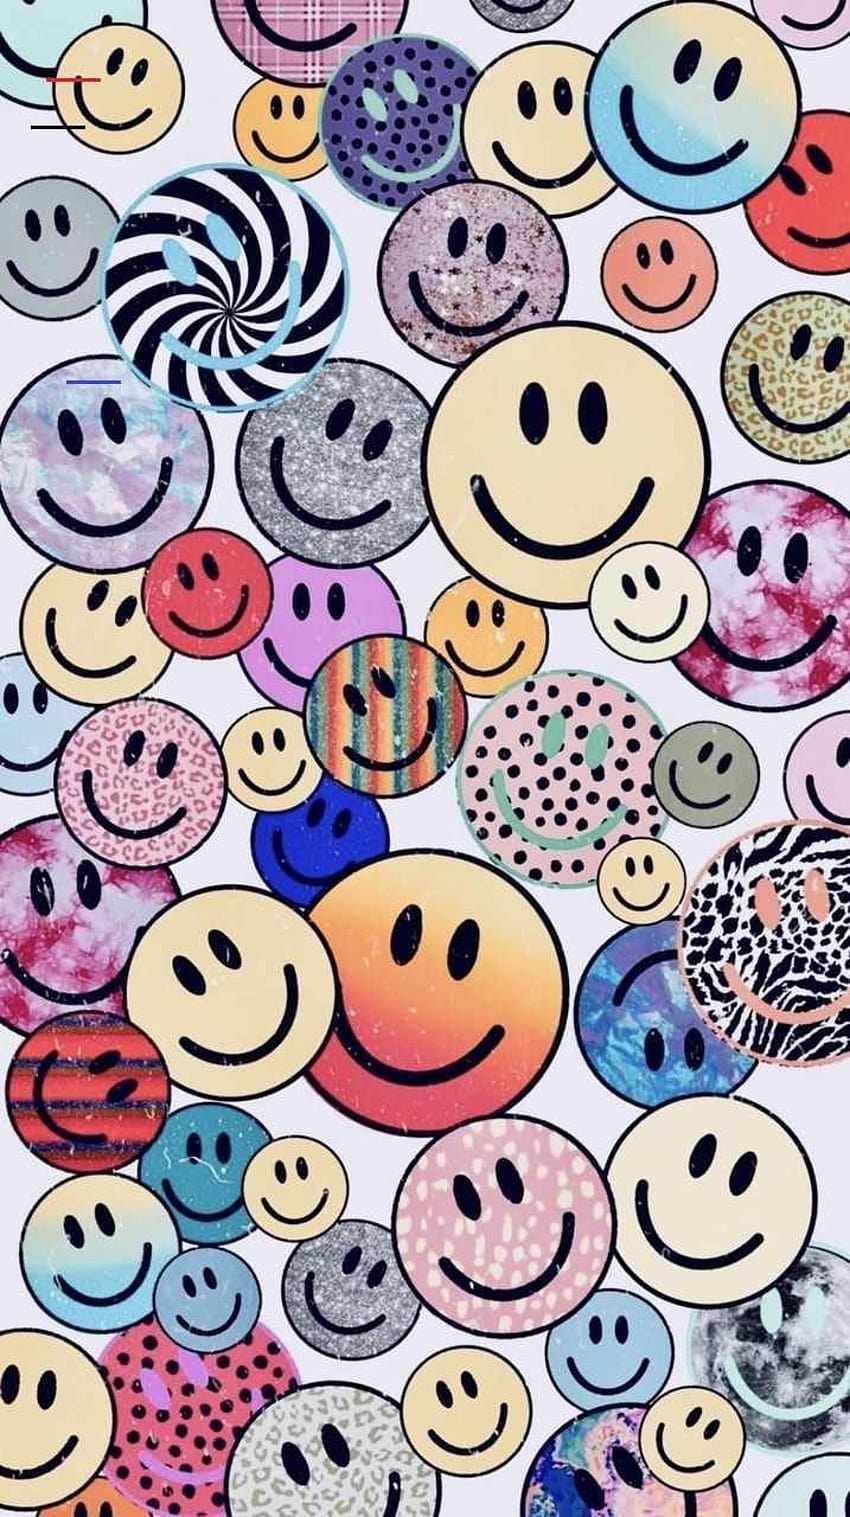 Cute Smiley Face posted by John Anderson, aesthetic smiley face HD ...